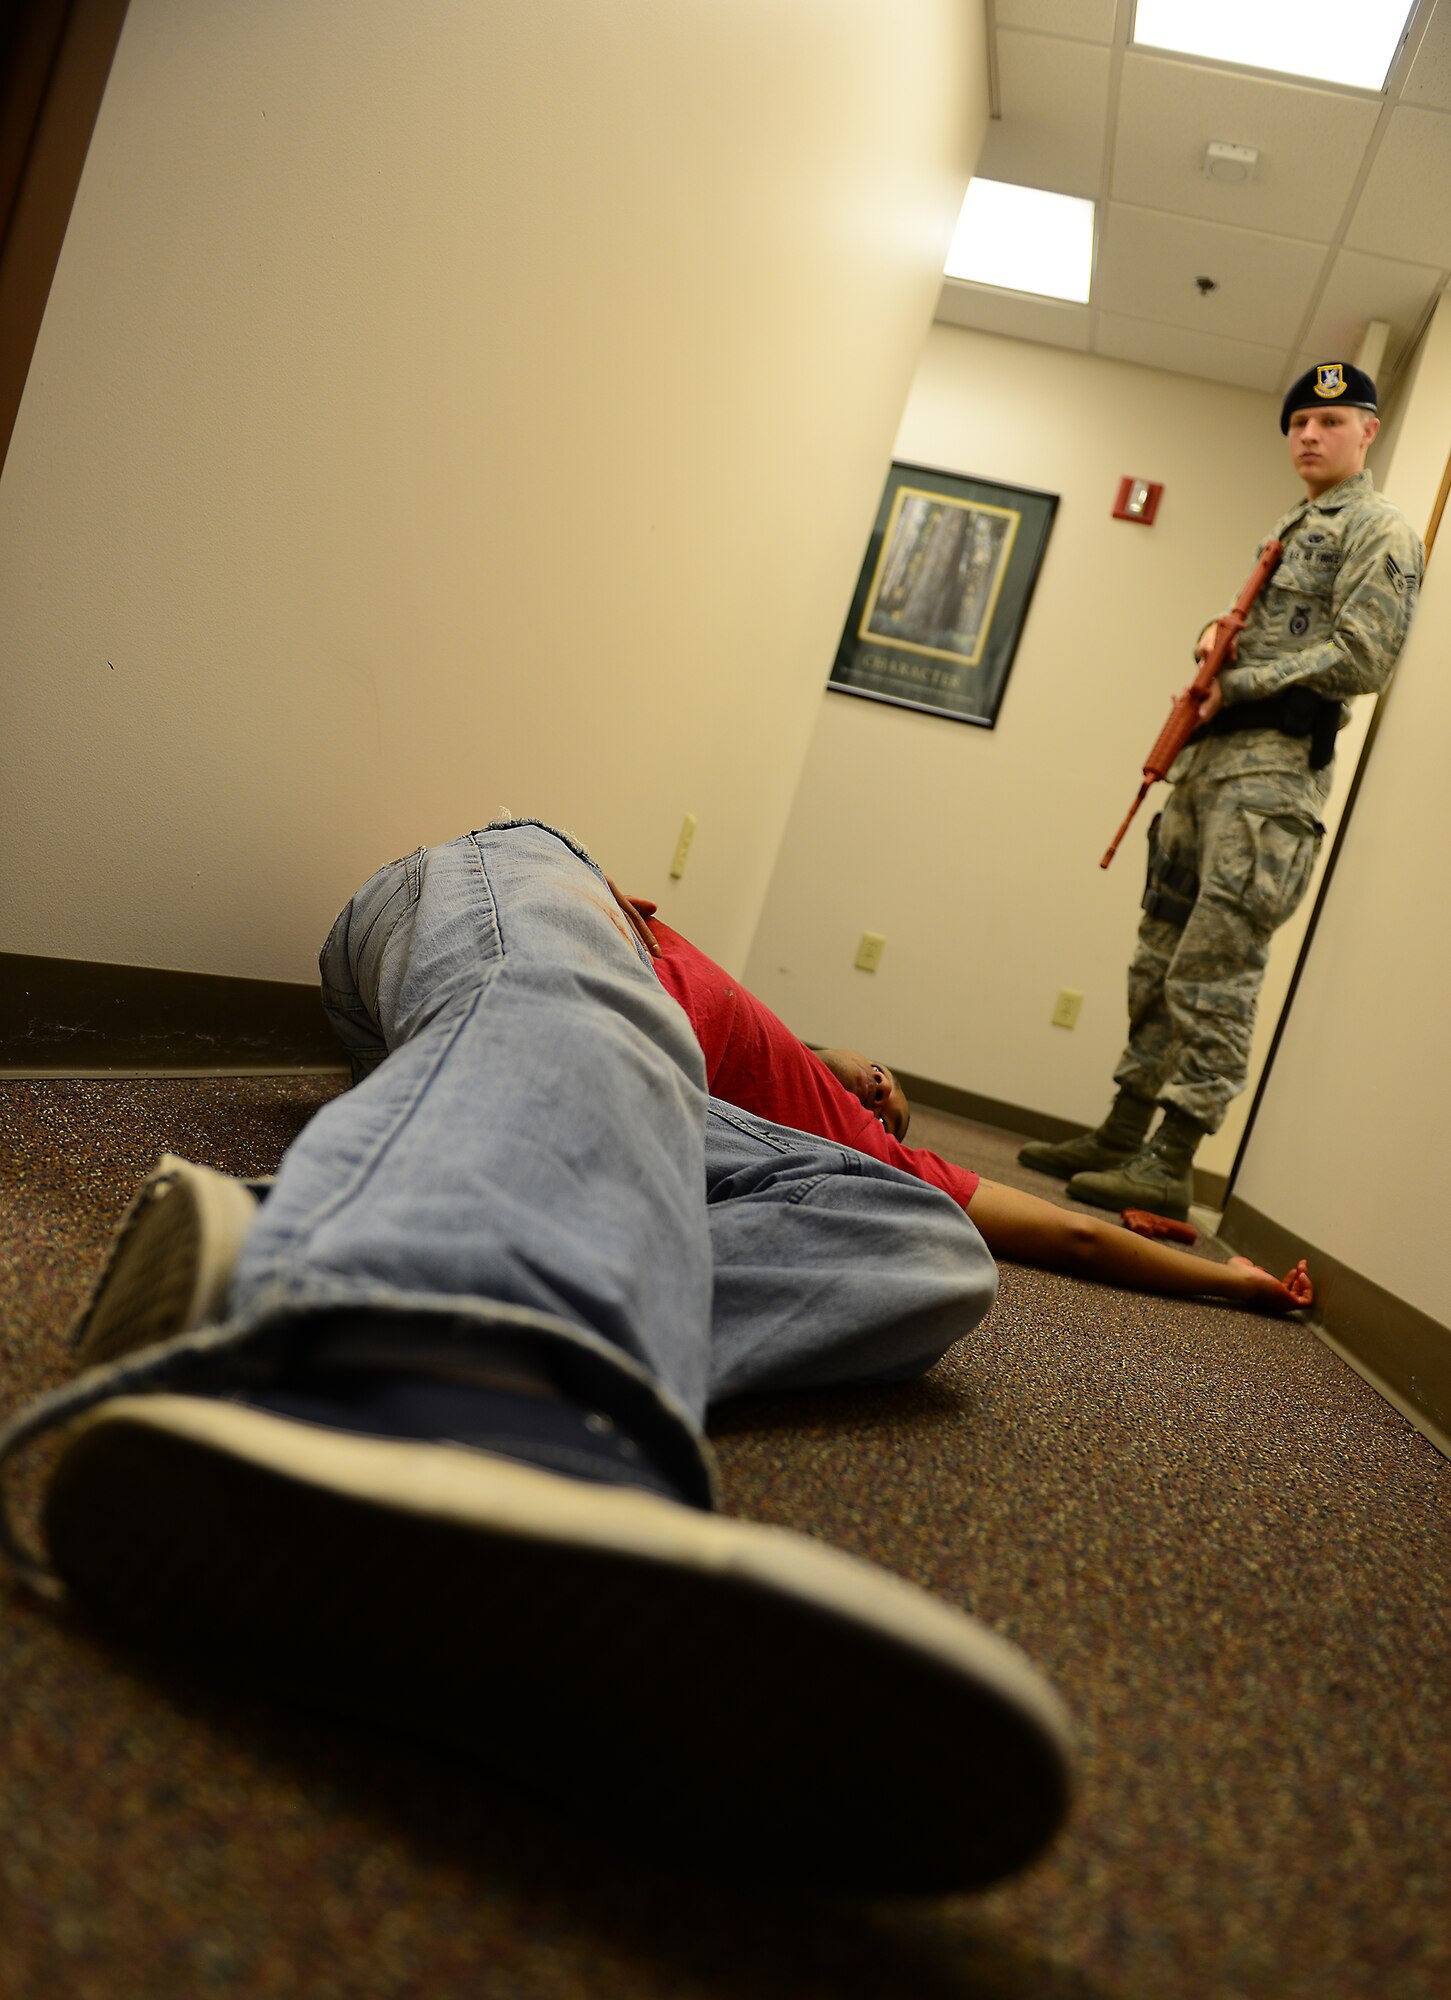 MOODY AIR FORCE BASE, Ga. – An Airman of the 23d Security Forces Squadron stands guard over the body of the active shooter in the base education office during an active shooter exercise at Moody Air Force Base, Ga., May 16, 2014. The exercise enabled the Exercise Evaluator Team (EET) members to gauge the reaction and response times of security forces and medical personnel. (U.S. Air Force photo by Senior Airman Tiffany M. Grigg/Released)